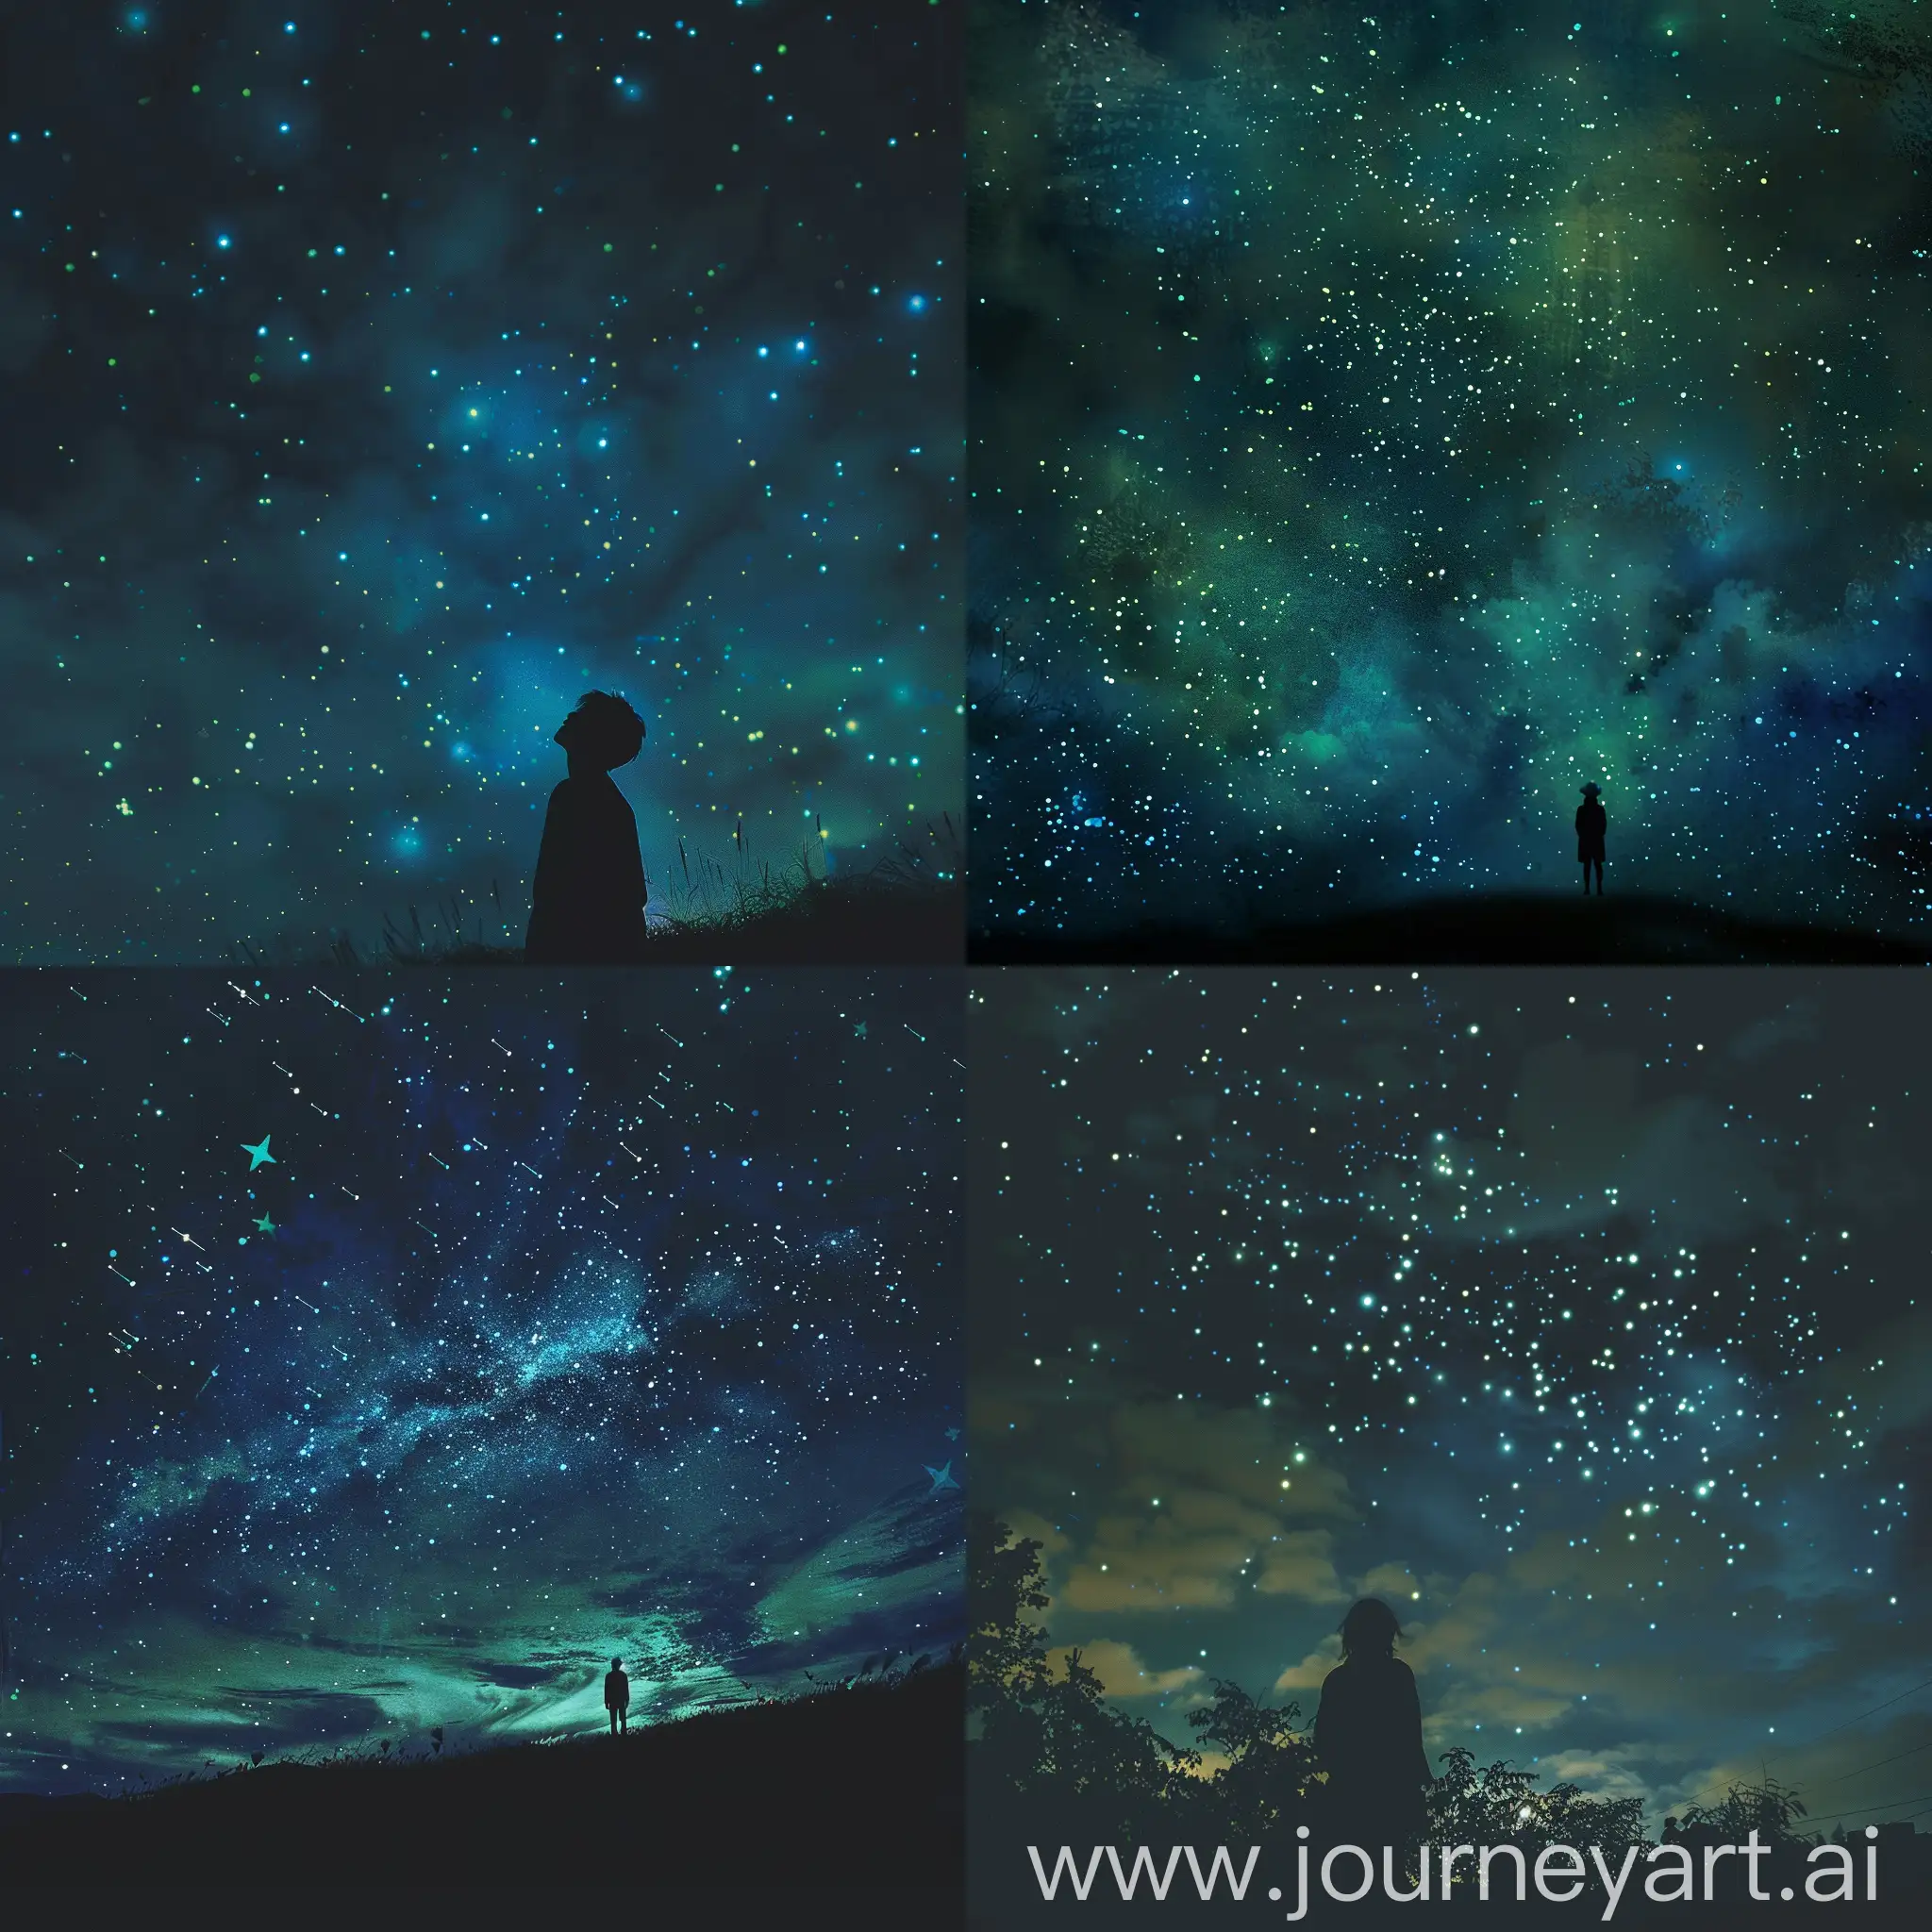 Dark sky with nostalgic stars with blue and green colors and strange person look in the sky